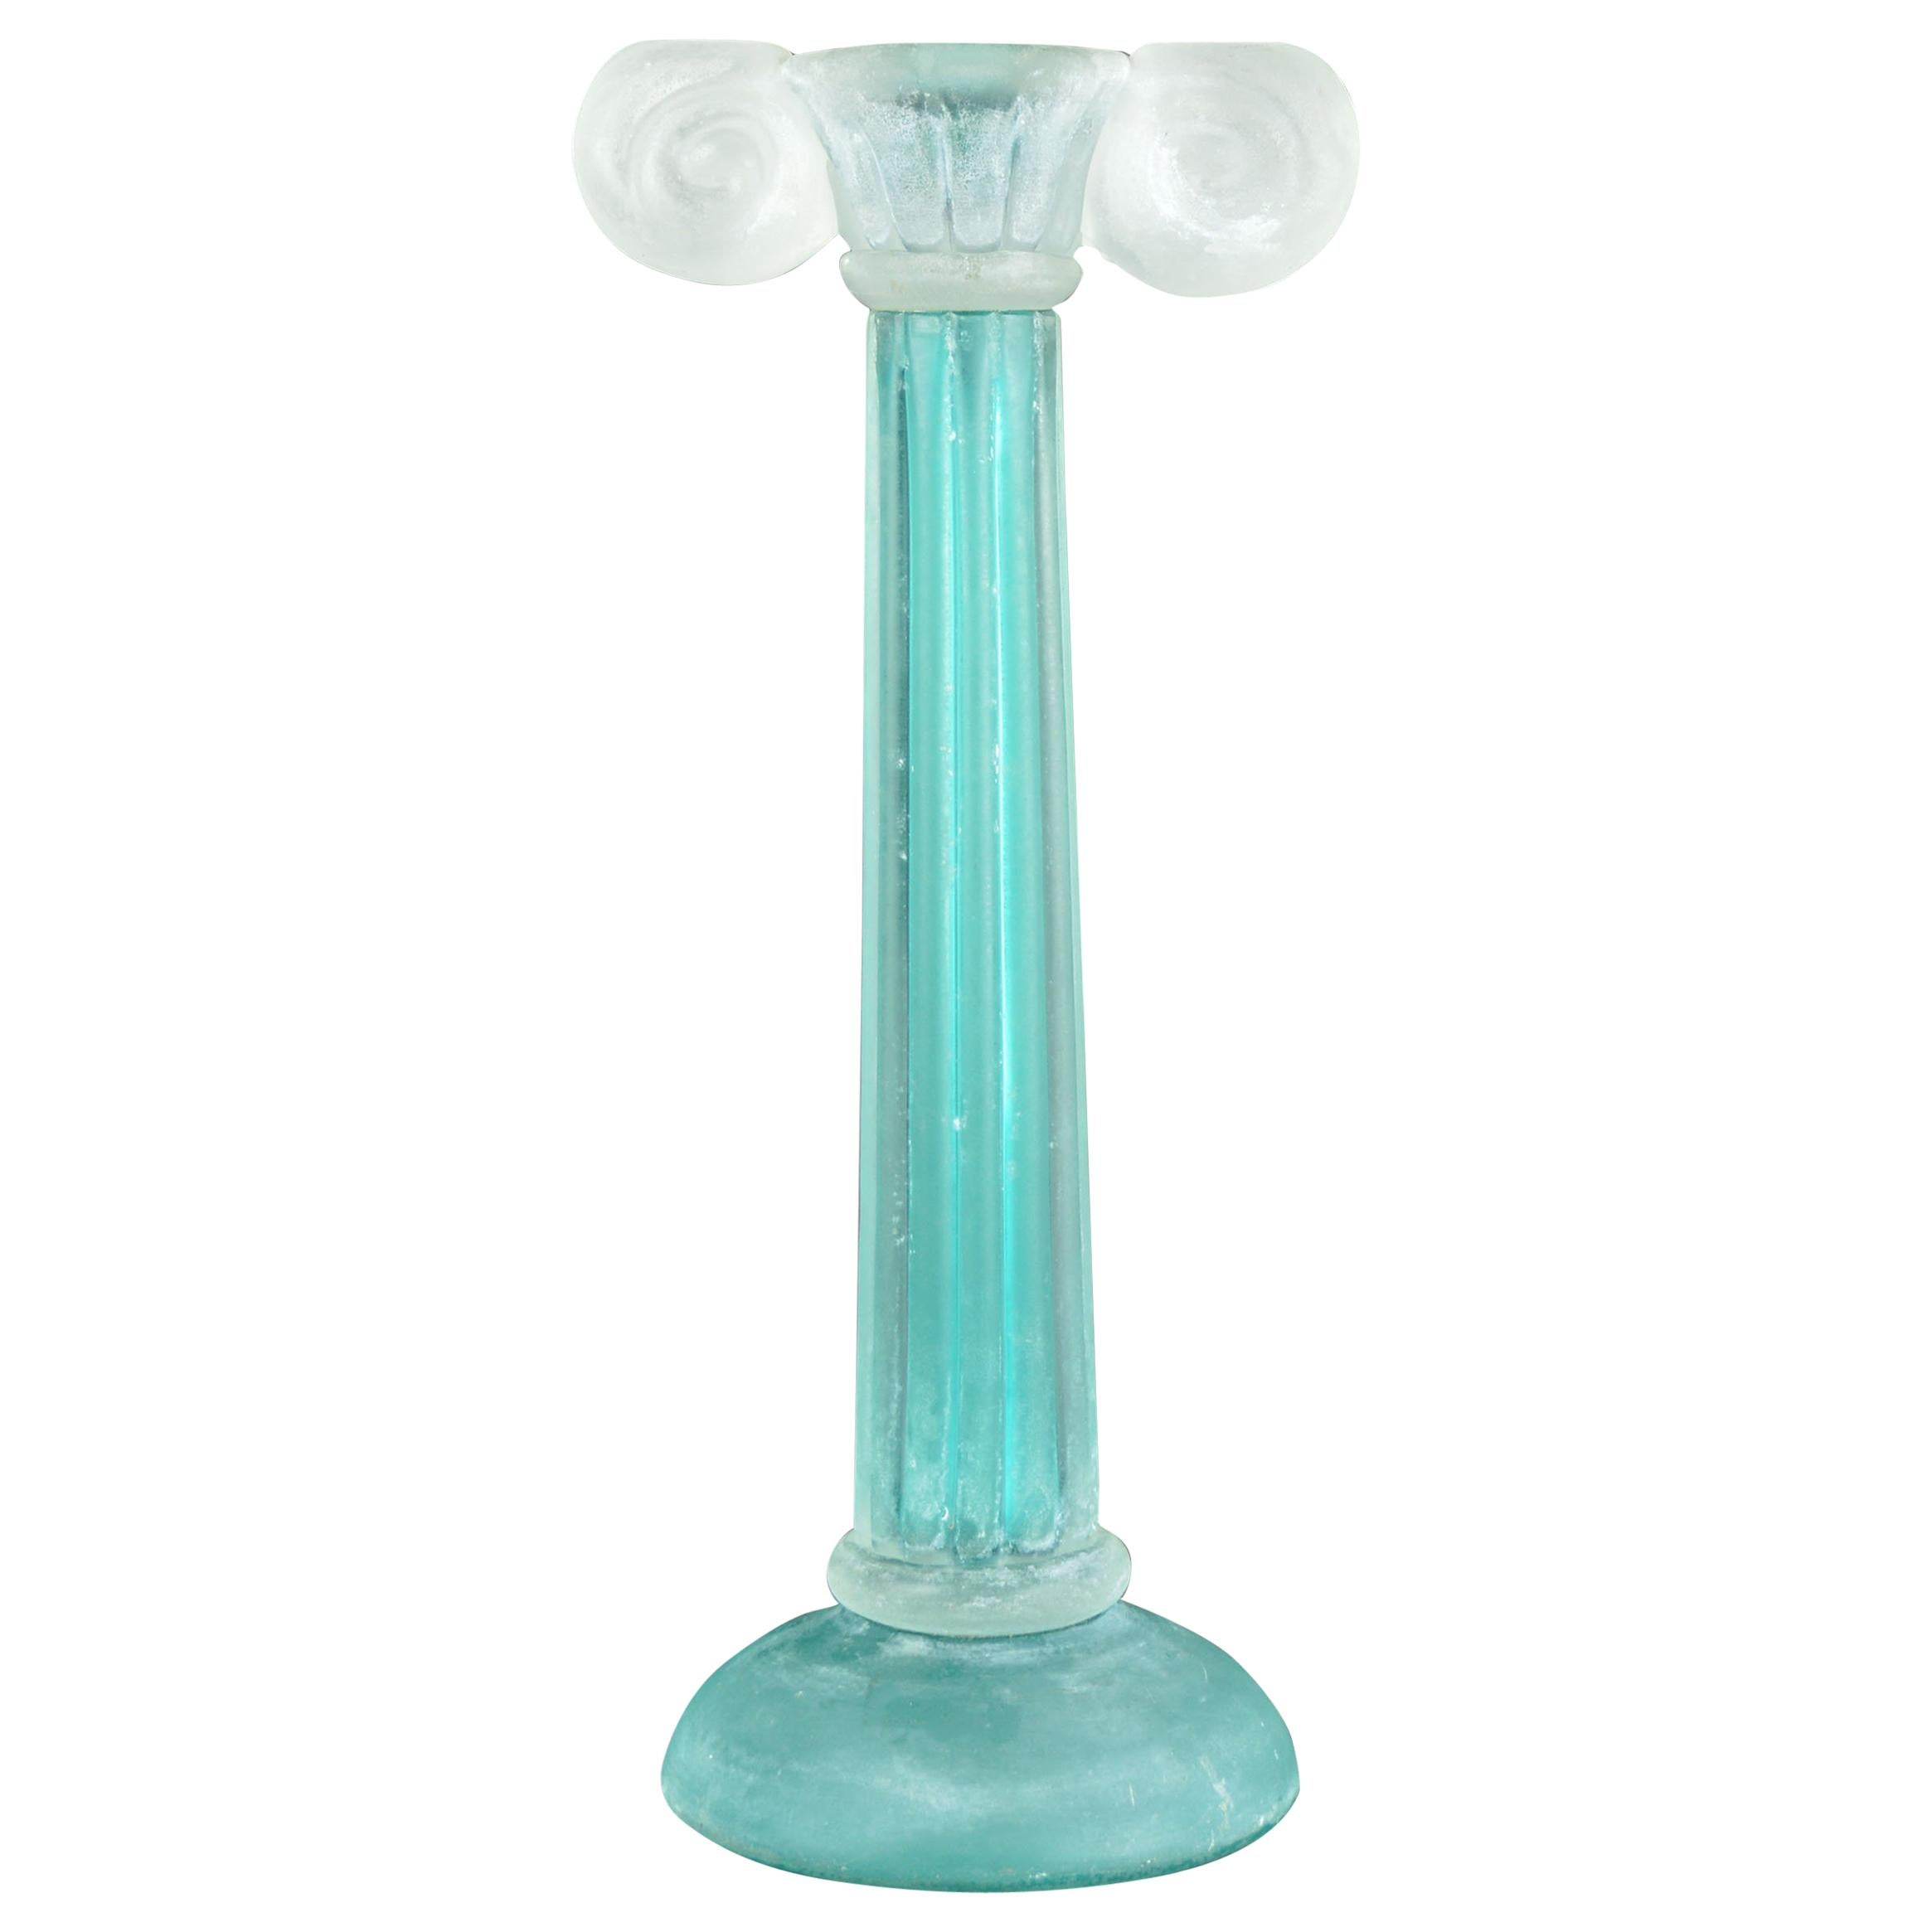 Midcentury Murano Glass Column Candlestick, Signed Cenedese, Venice, 1950s